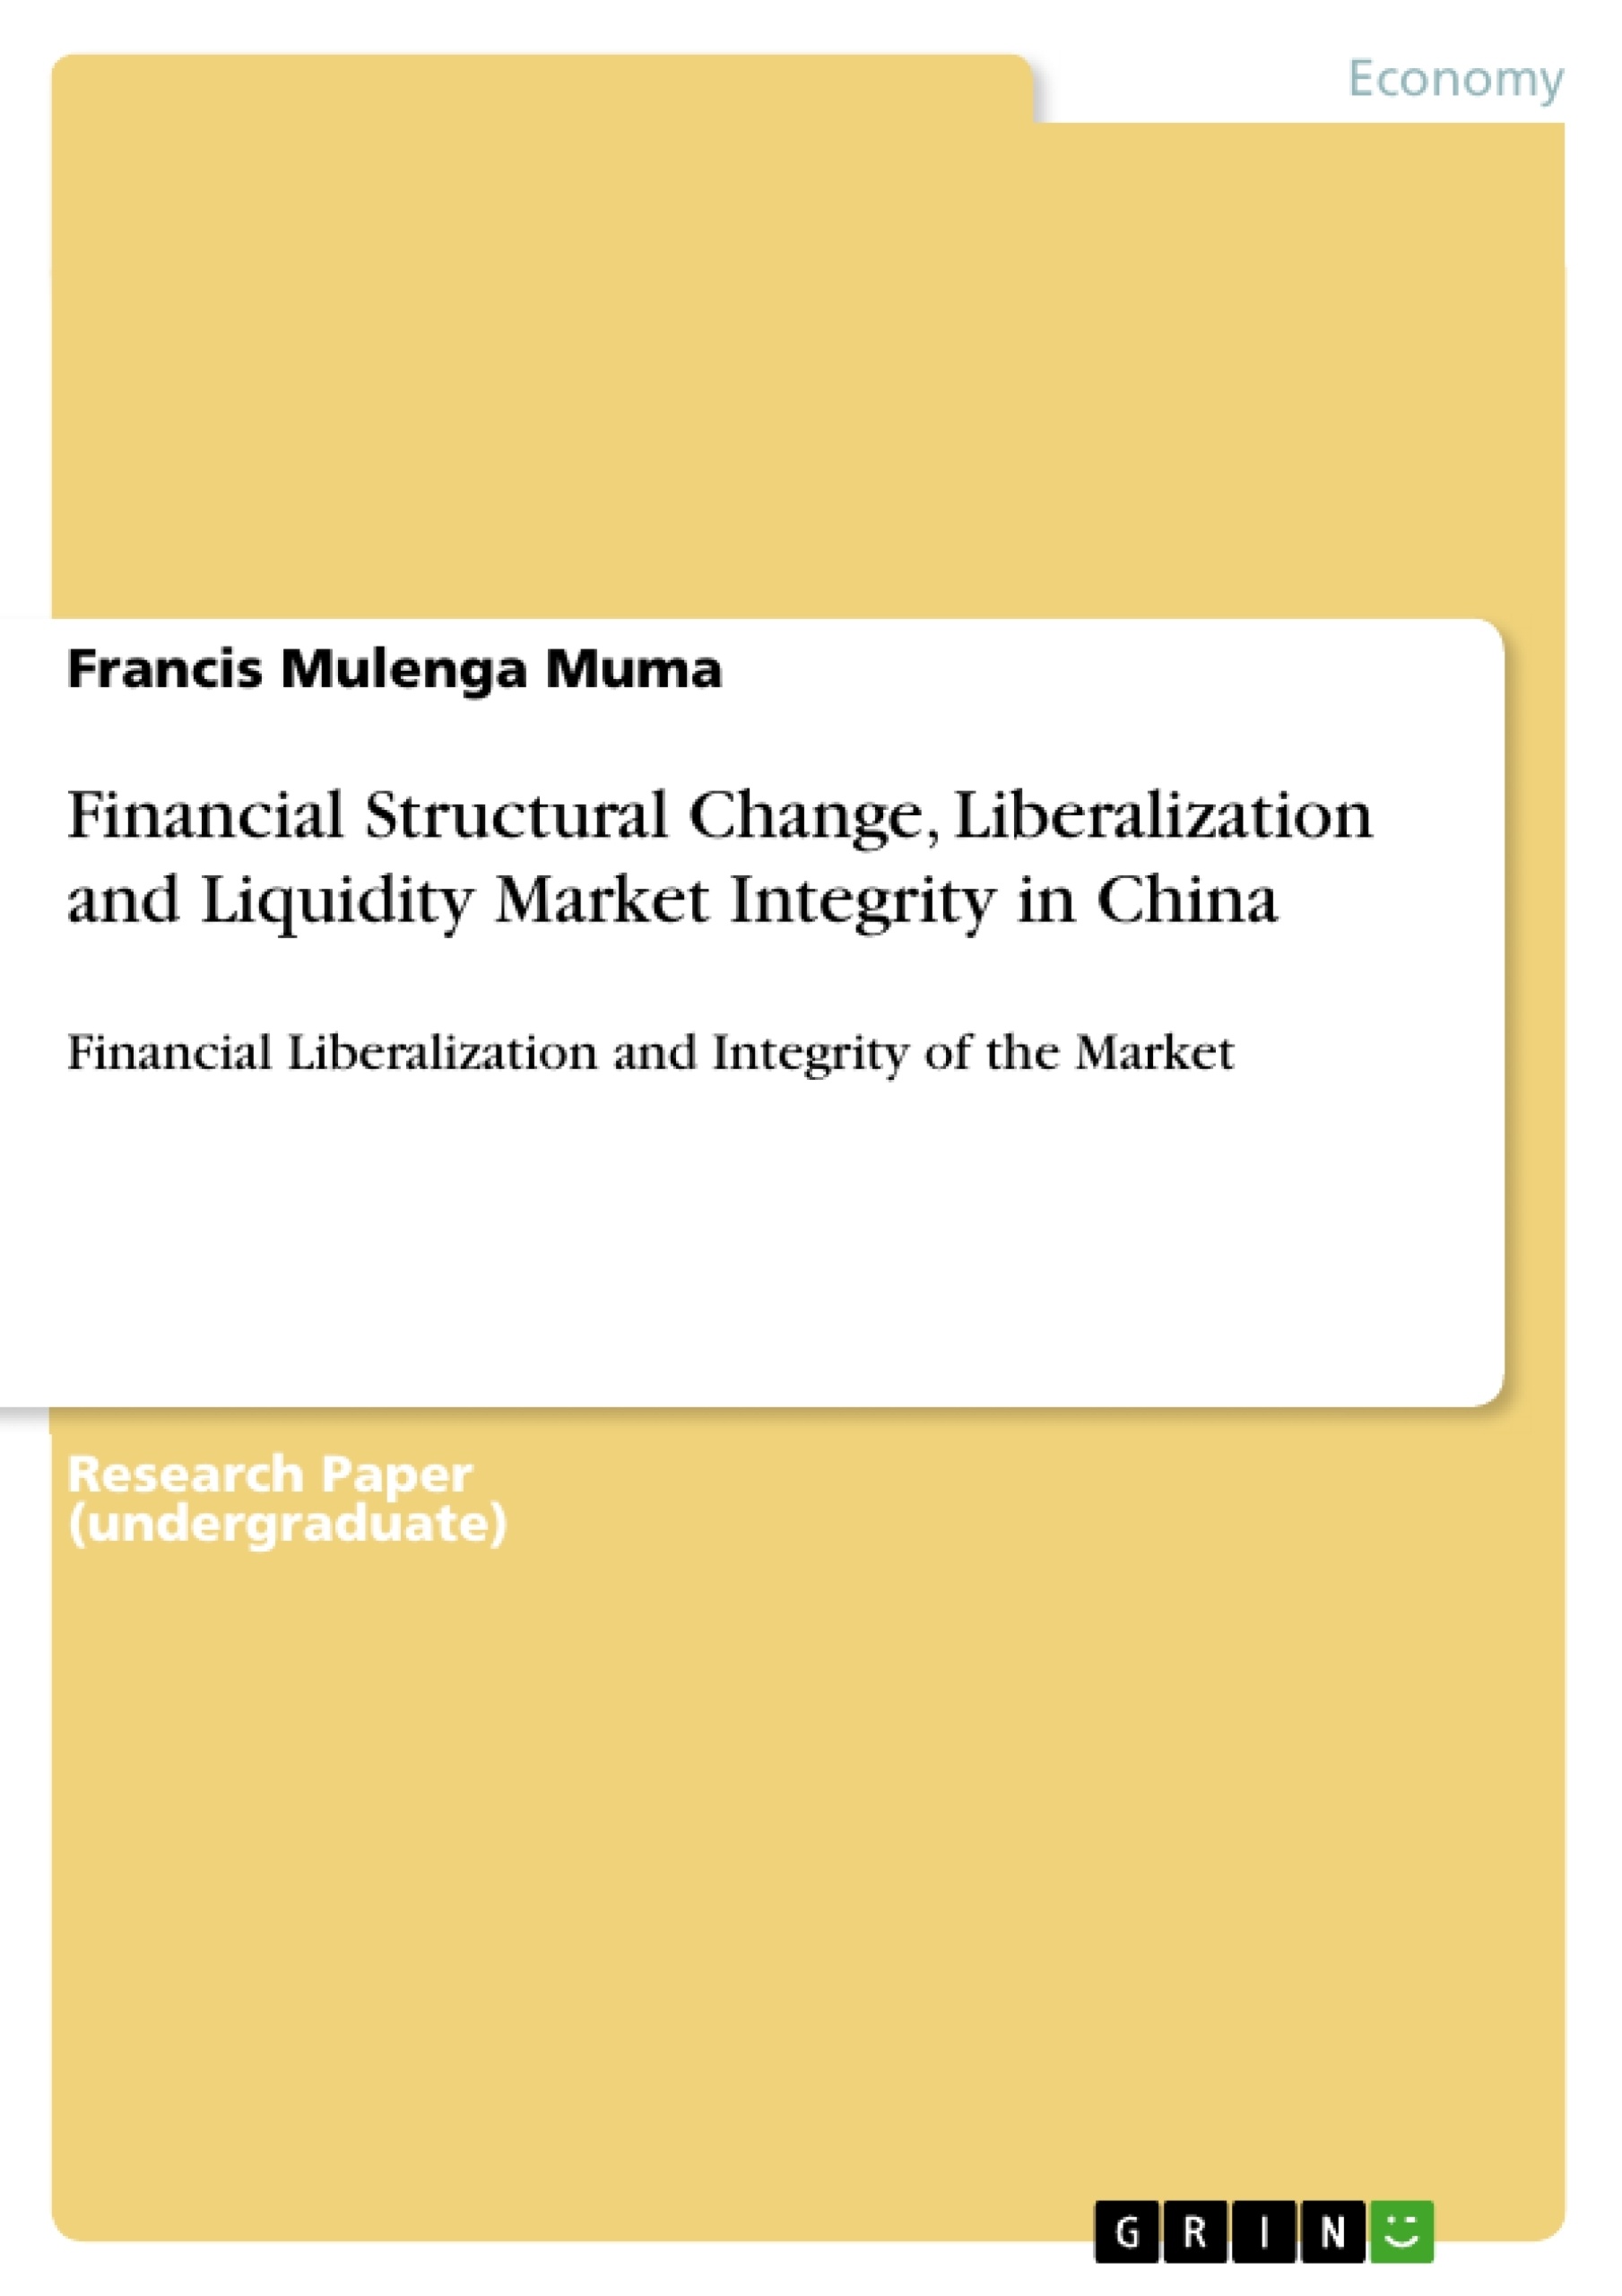 Título: Financial Structural Change, Liberalization and Liquidity Market Integrity in China